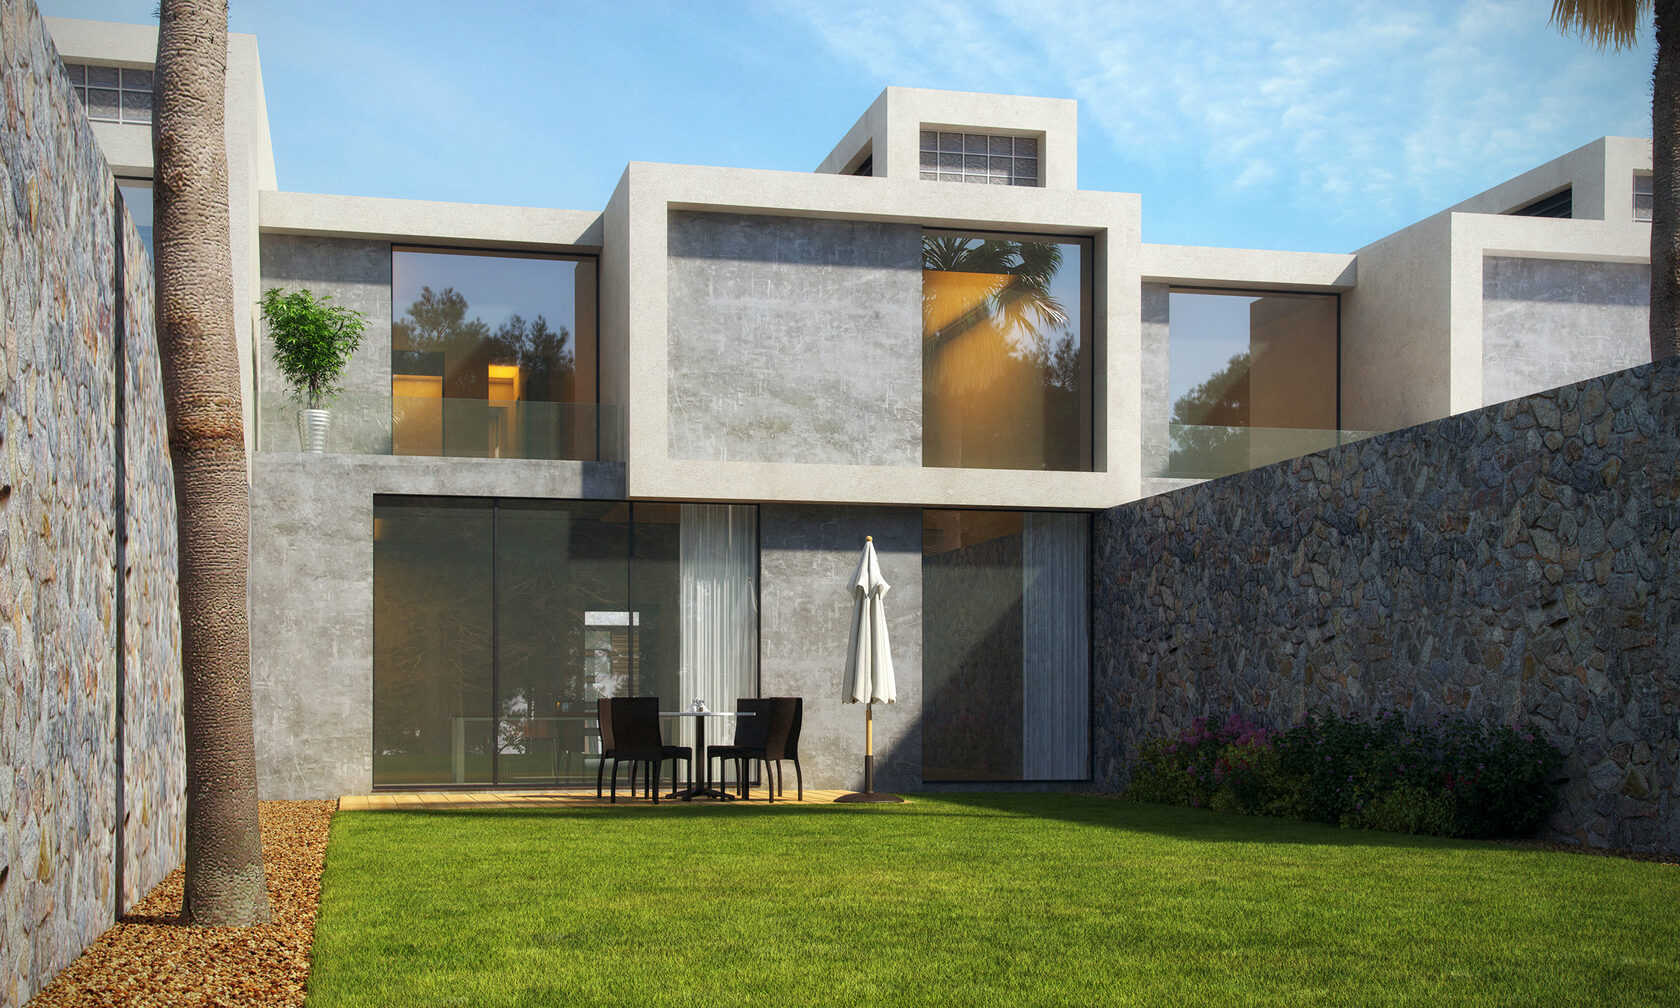 sustainable buildings and architectural objects rendered by autodesk software Credit: Zarender and AI